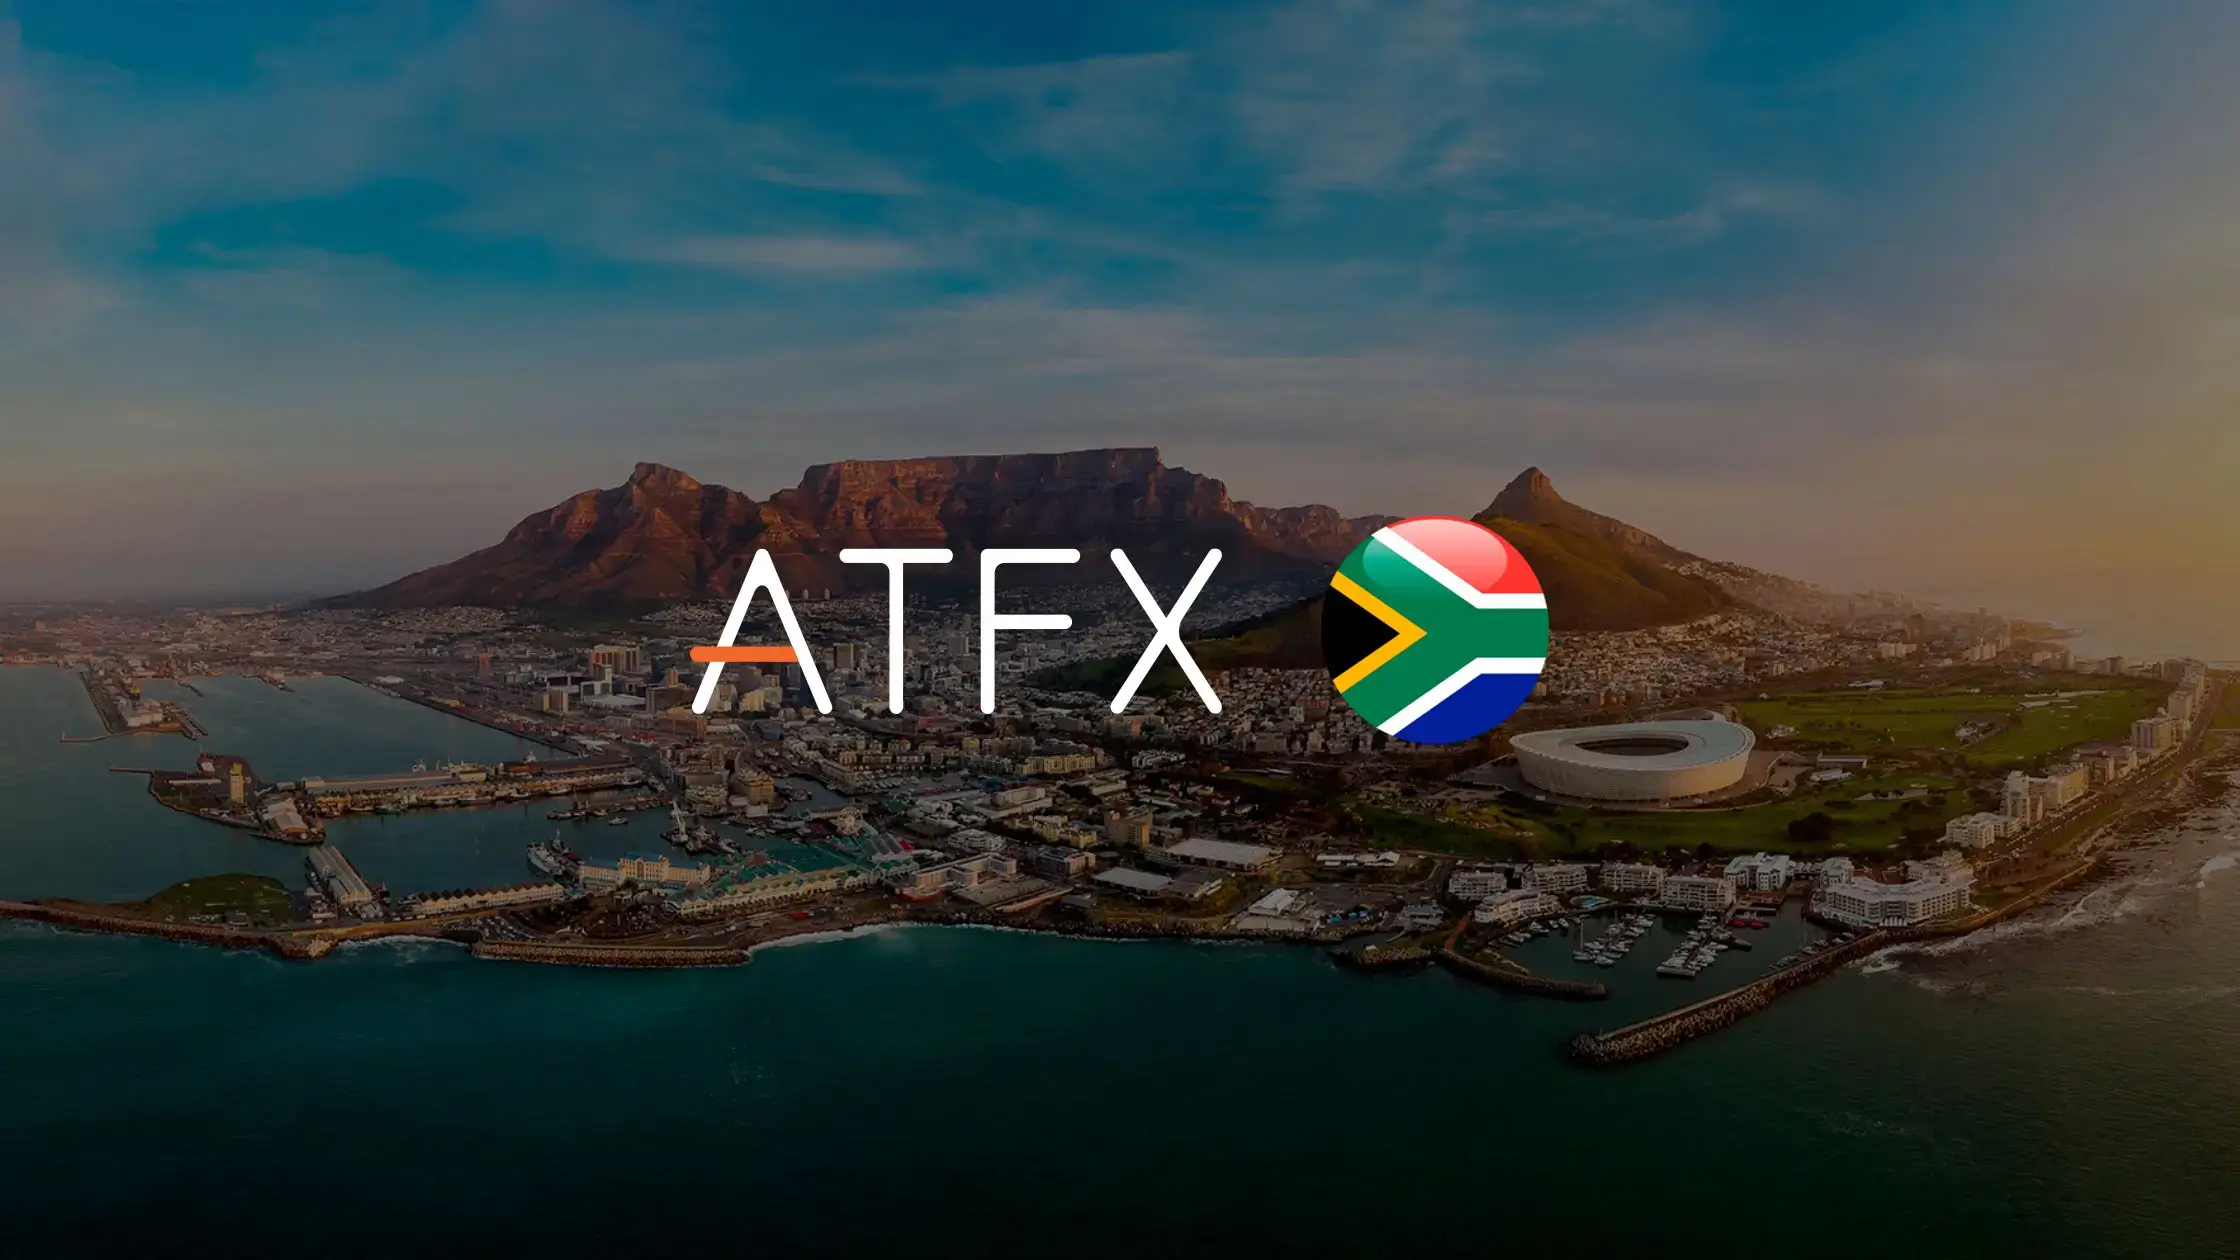 atfx-south-africa-odp-license-khwezi-financial-services